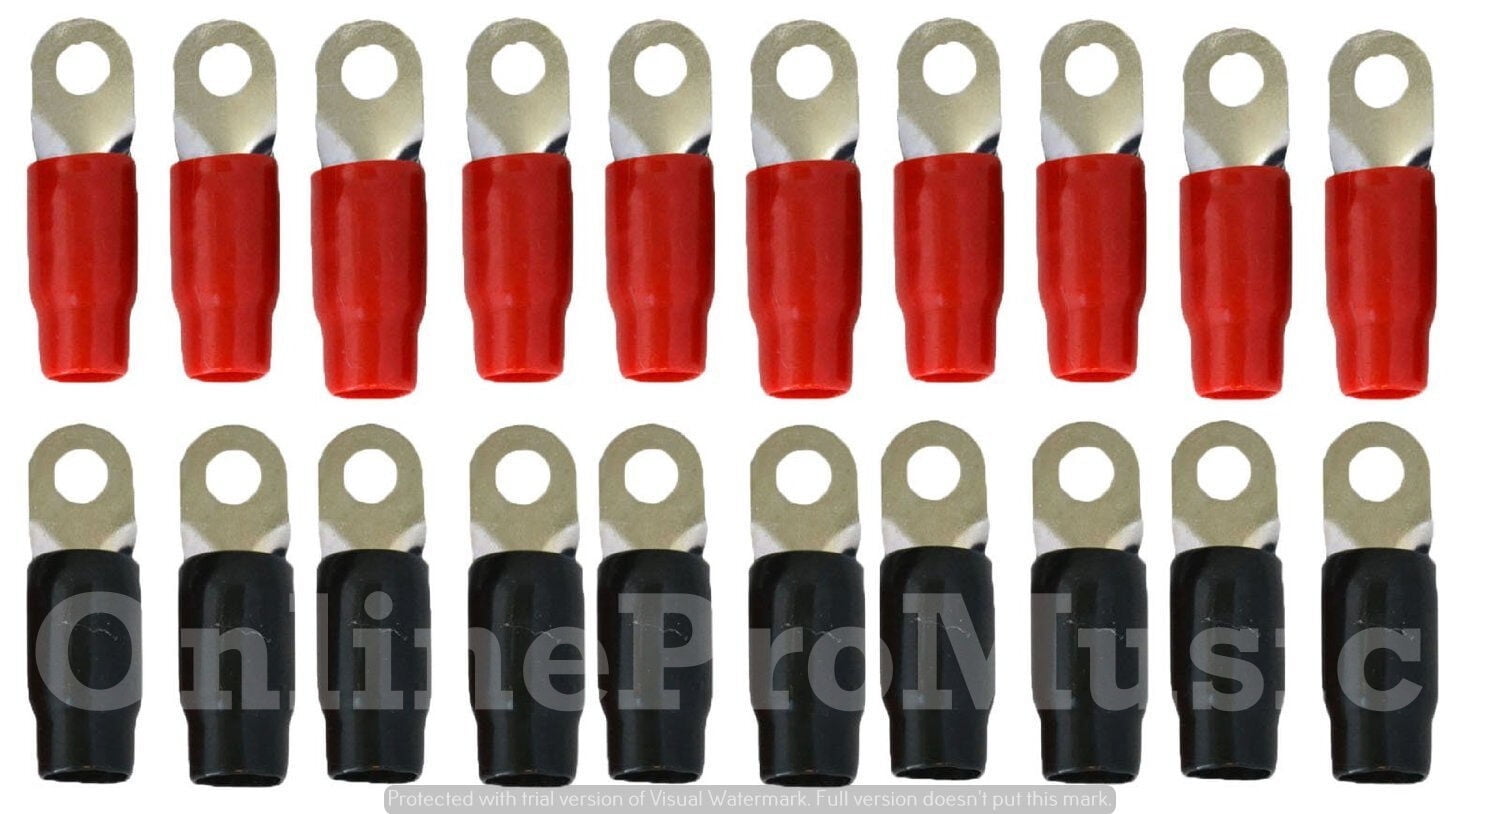 0 Gauge Gold Ring Terminal 80 Pack 1/0 AWG Wire Crimp Cable Red Black Boots 3/8" 